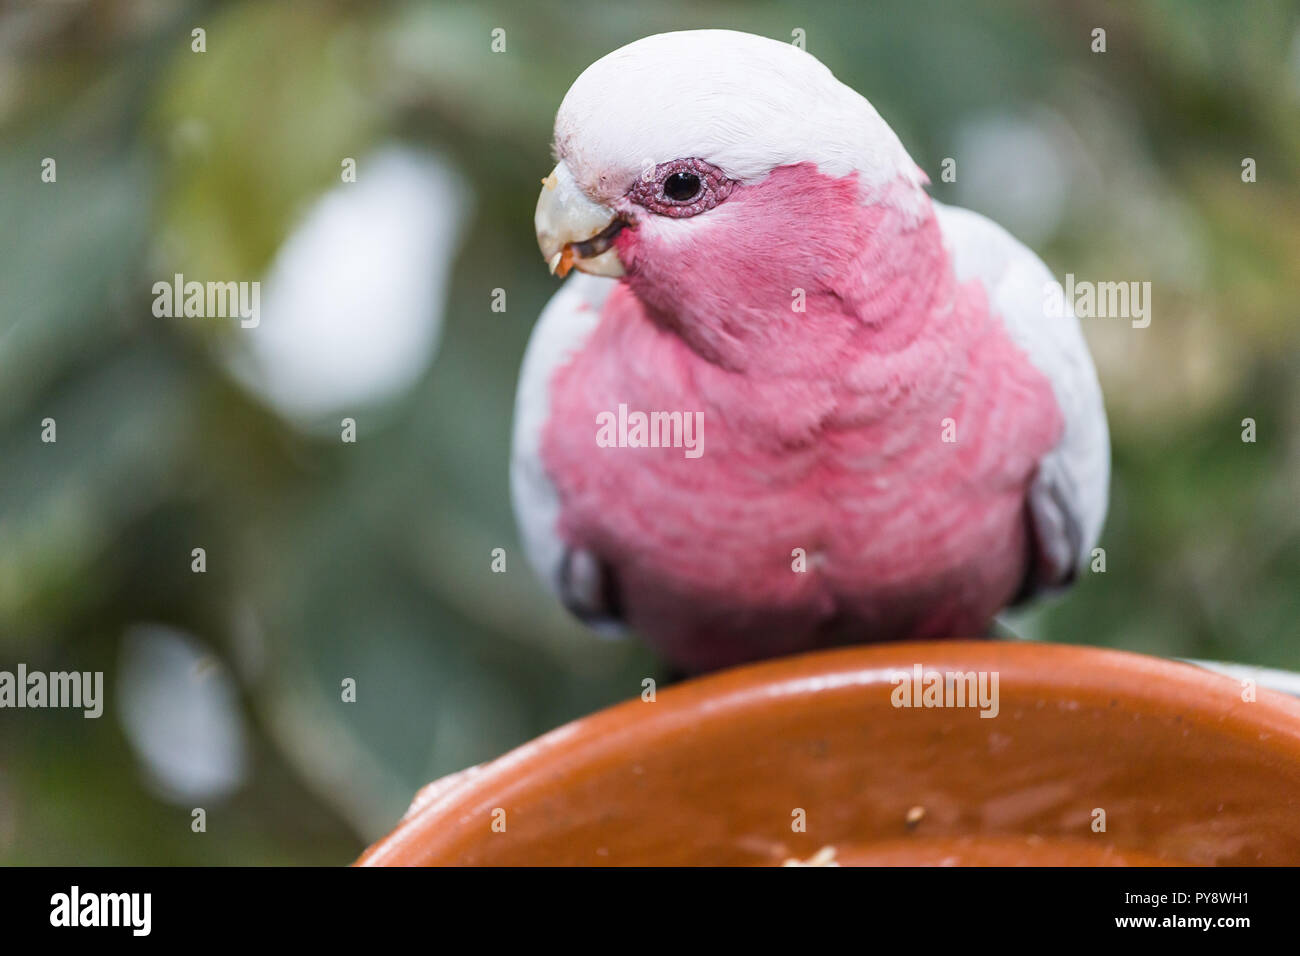 Bird Wildlife And Zoo Concept Galah Rose Breasted Cockatoo Parrot Sits On A Bowl With Food Stock Photo Alamy,Barbacoa Meat